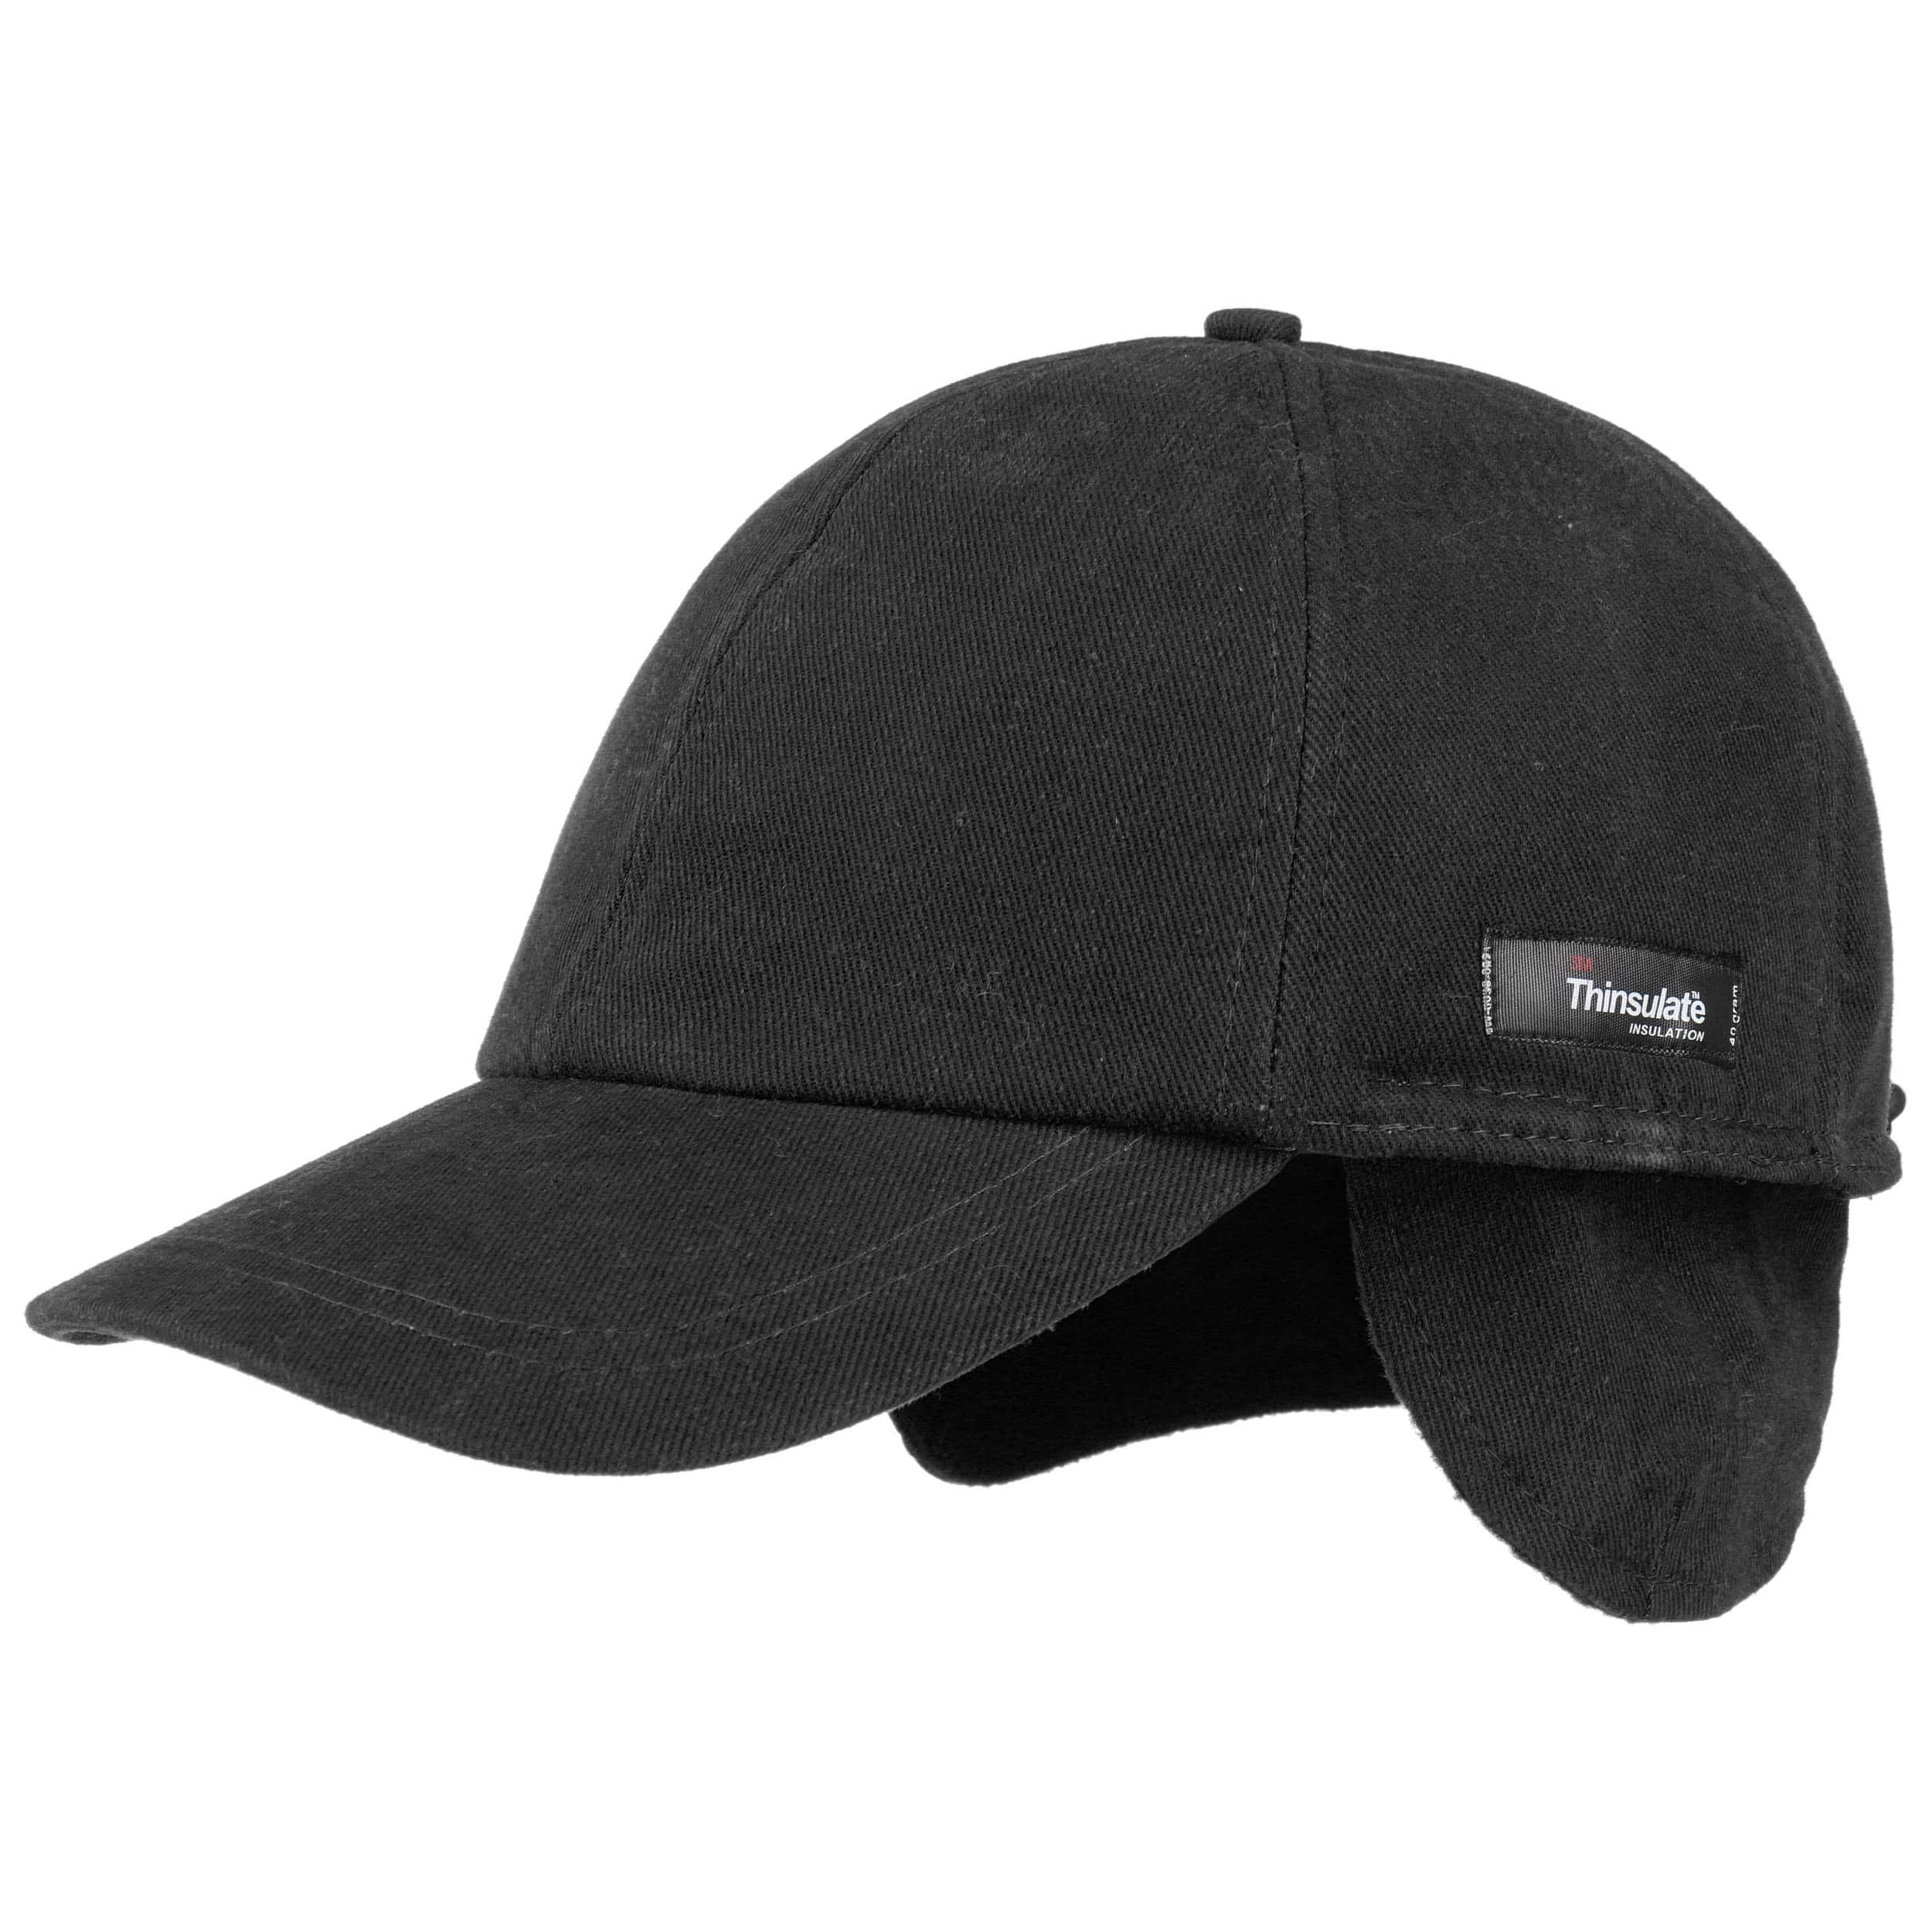 Thinsulate Cap mit Ohrenklappen - Lipodo 24,95 by €